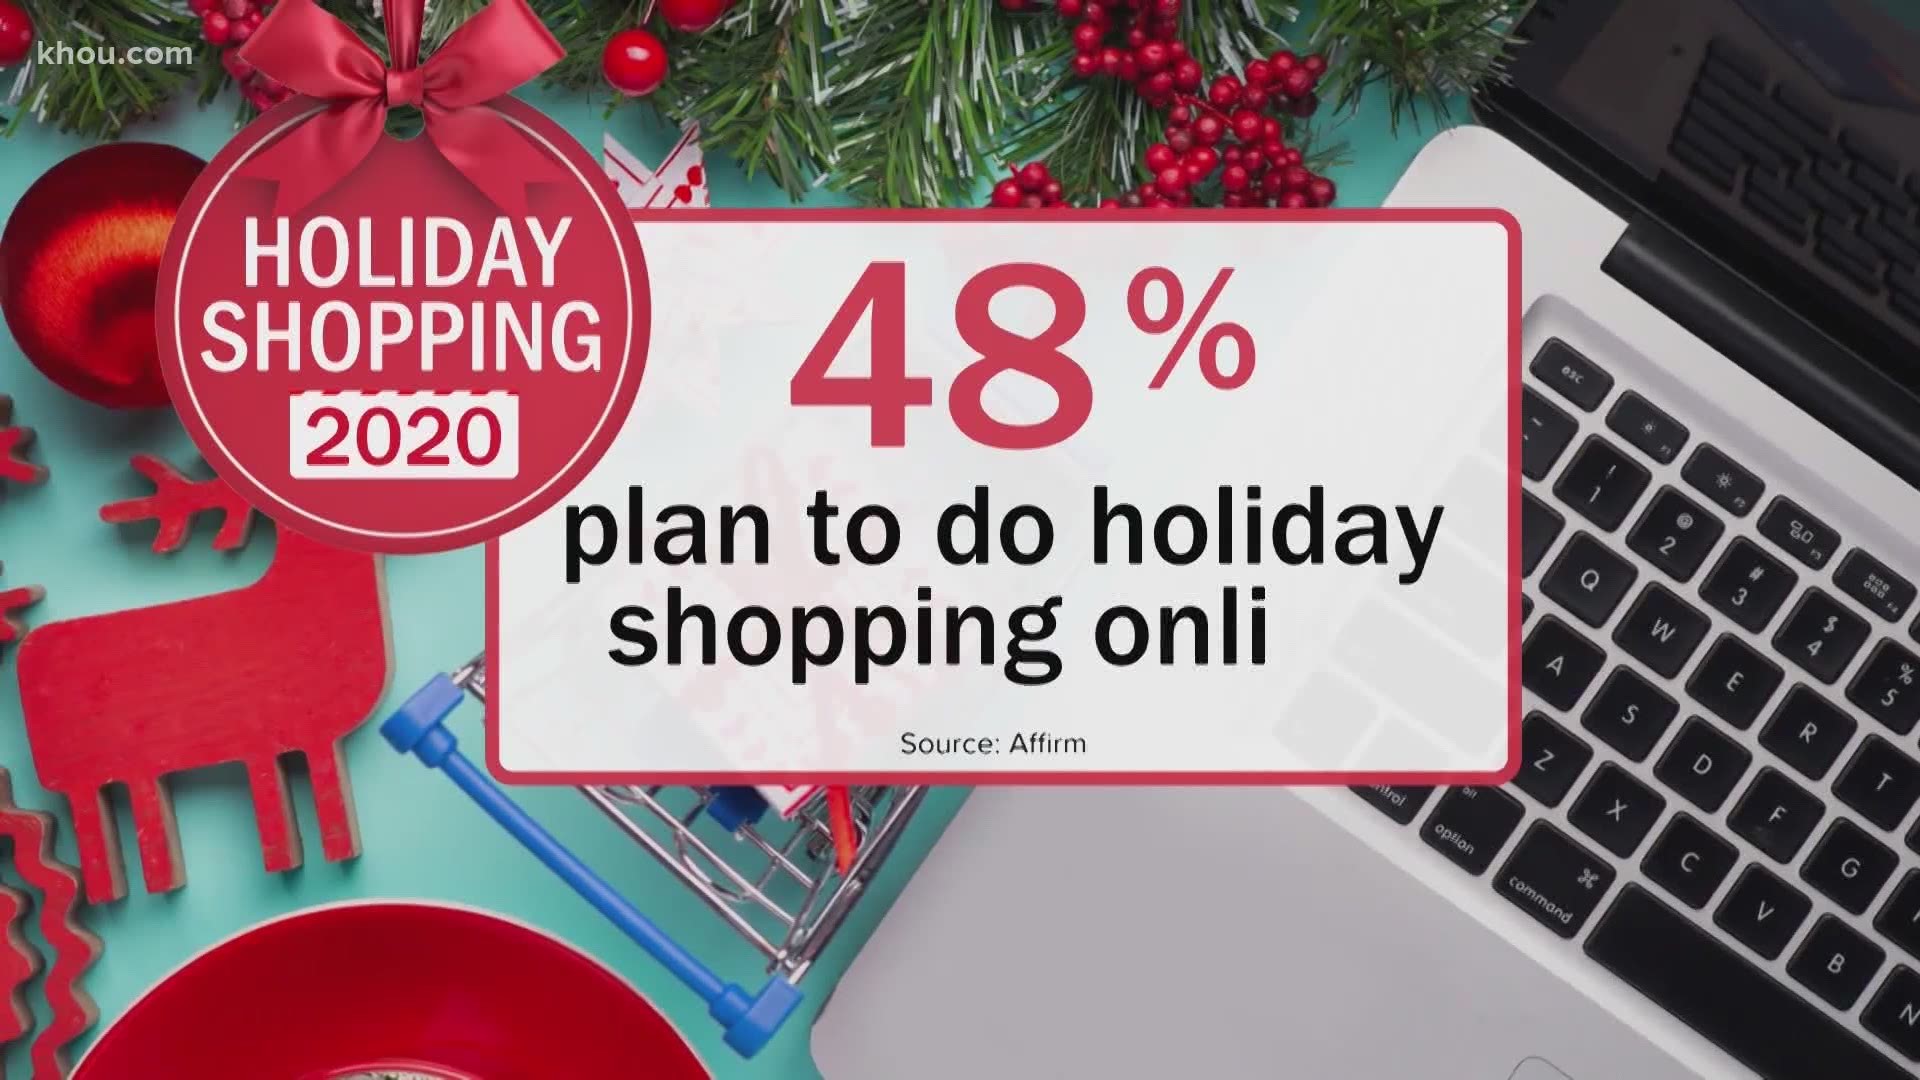 With record numbers of online purchases expected this holiday season, retail analysts predict that shipping delays will be the biggest issue for last-minute shoppers